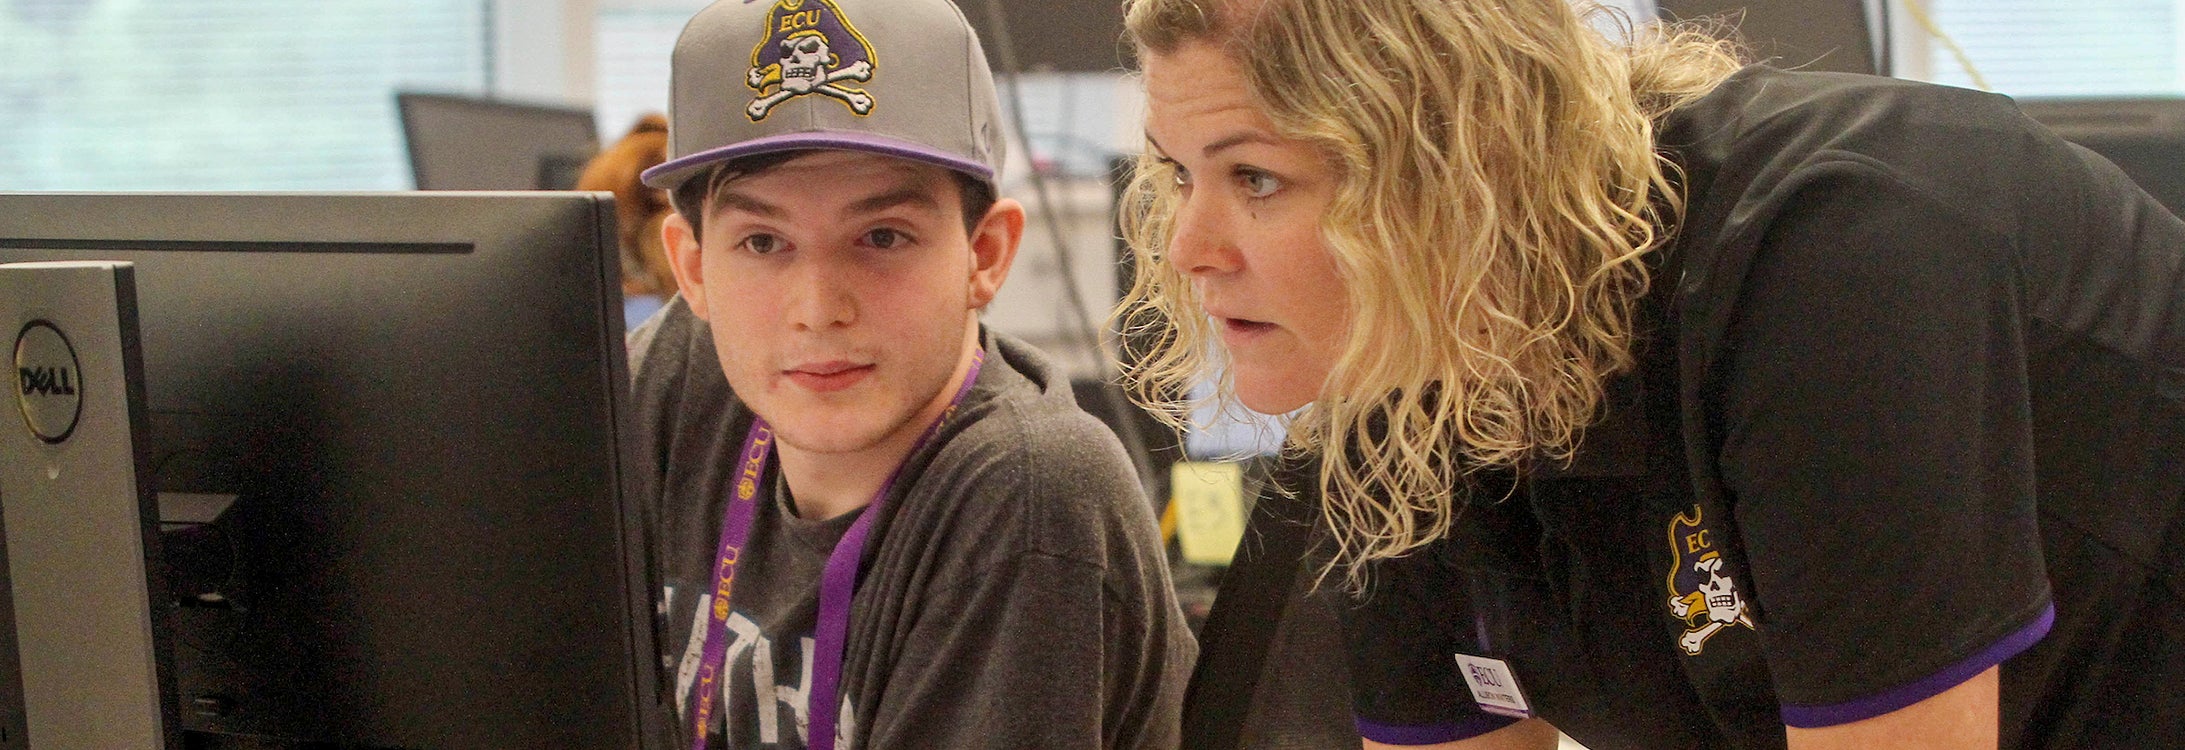 Daniel Martin Coffey, an incoming freshman to ECUís College of Engineering and Technoloy from Charlotte, gets some help with his schedule from academic advisor Allison Winters during orientation on Tuesday, June 11, 2019, in the Science and Technology Building